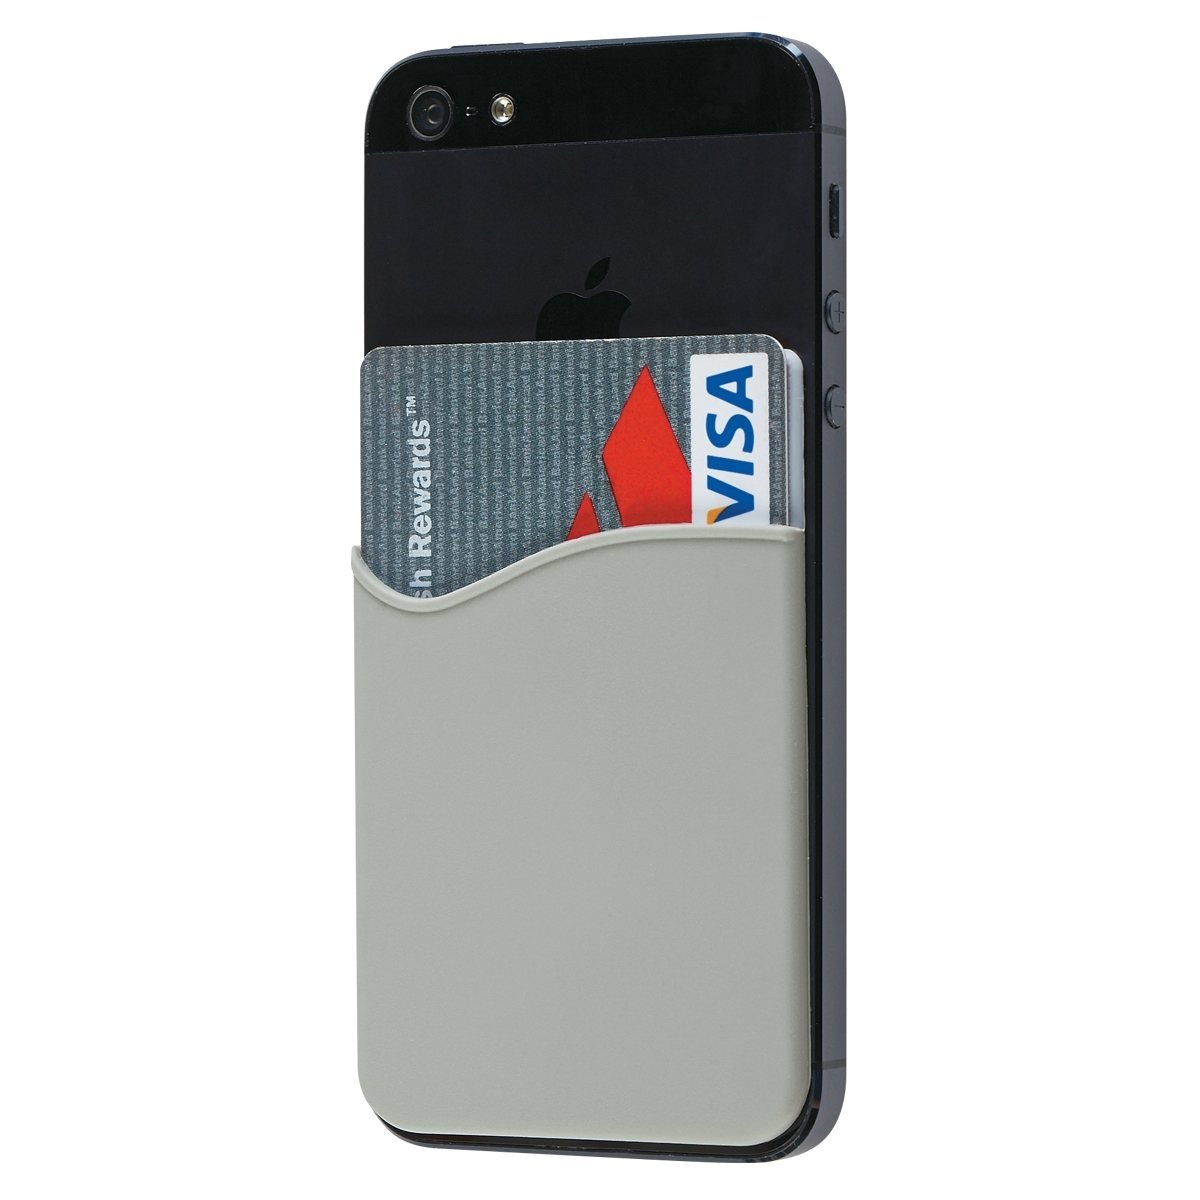 What are the benefits of branded phone wallets for businesses?